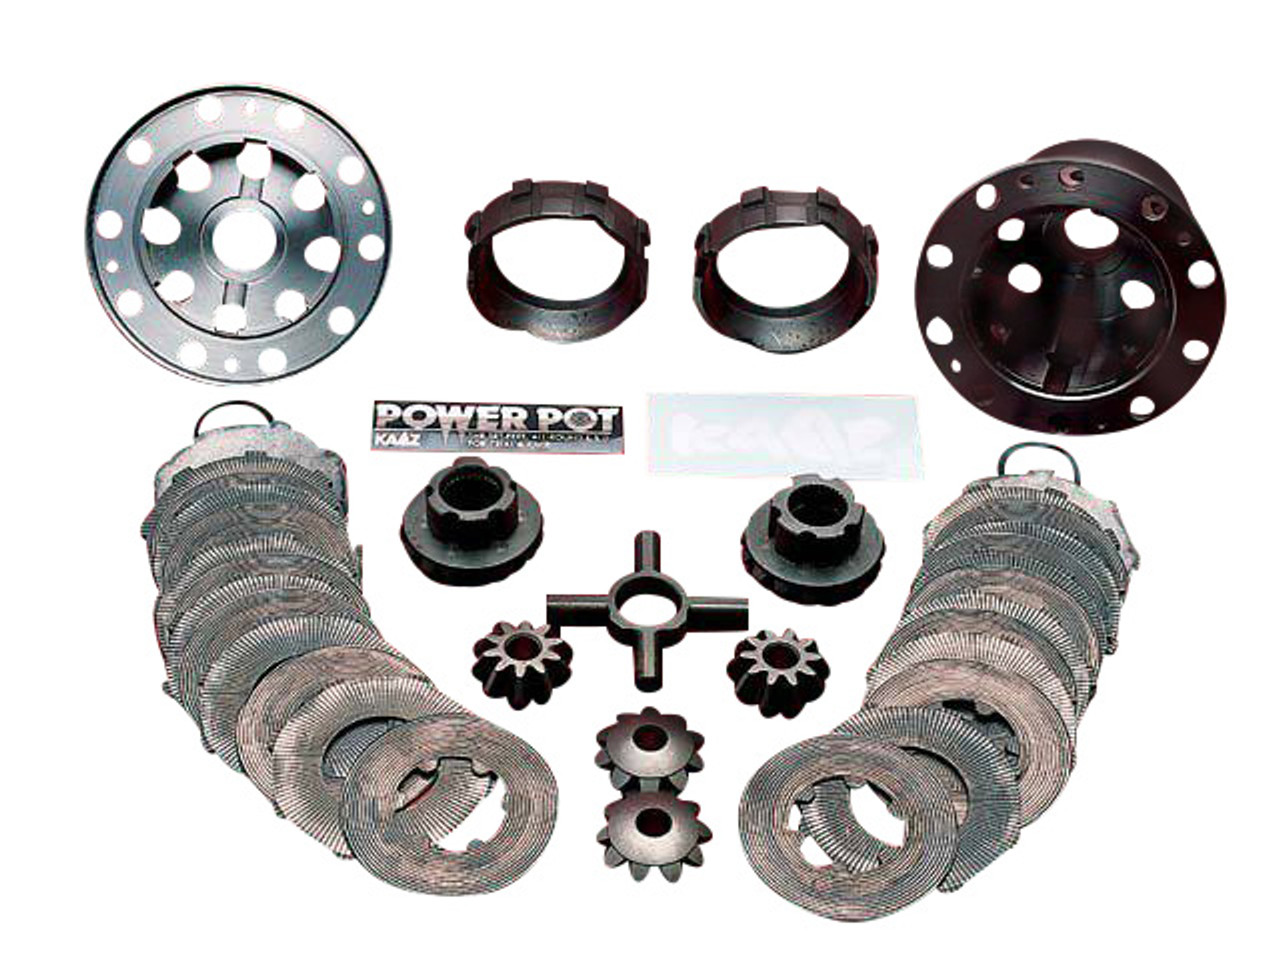 Kaaz 2-way LSD for Nissan 240sx w/ Open Differential